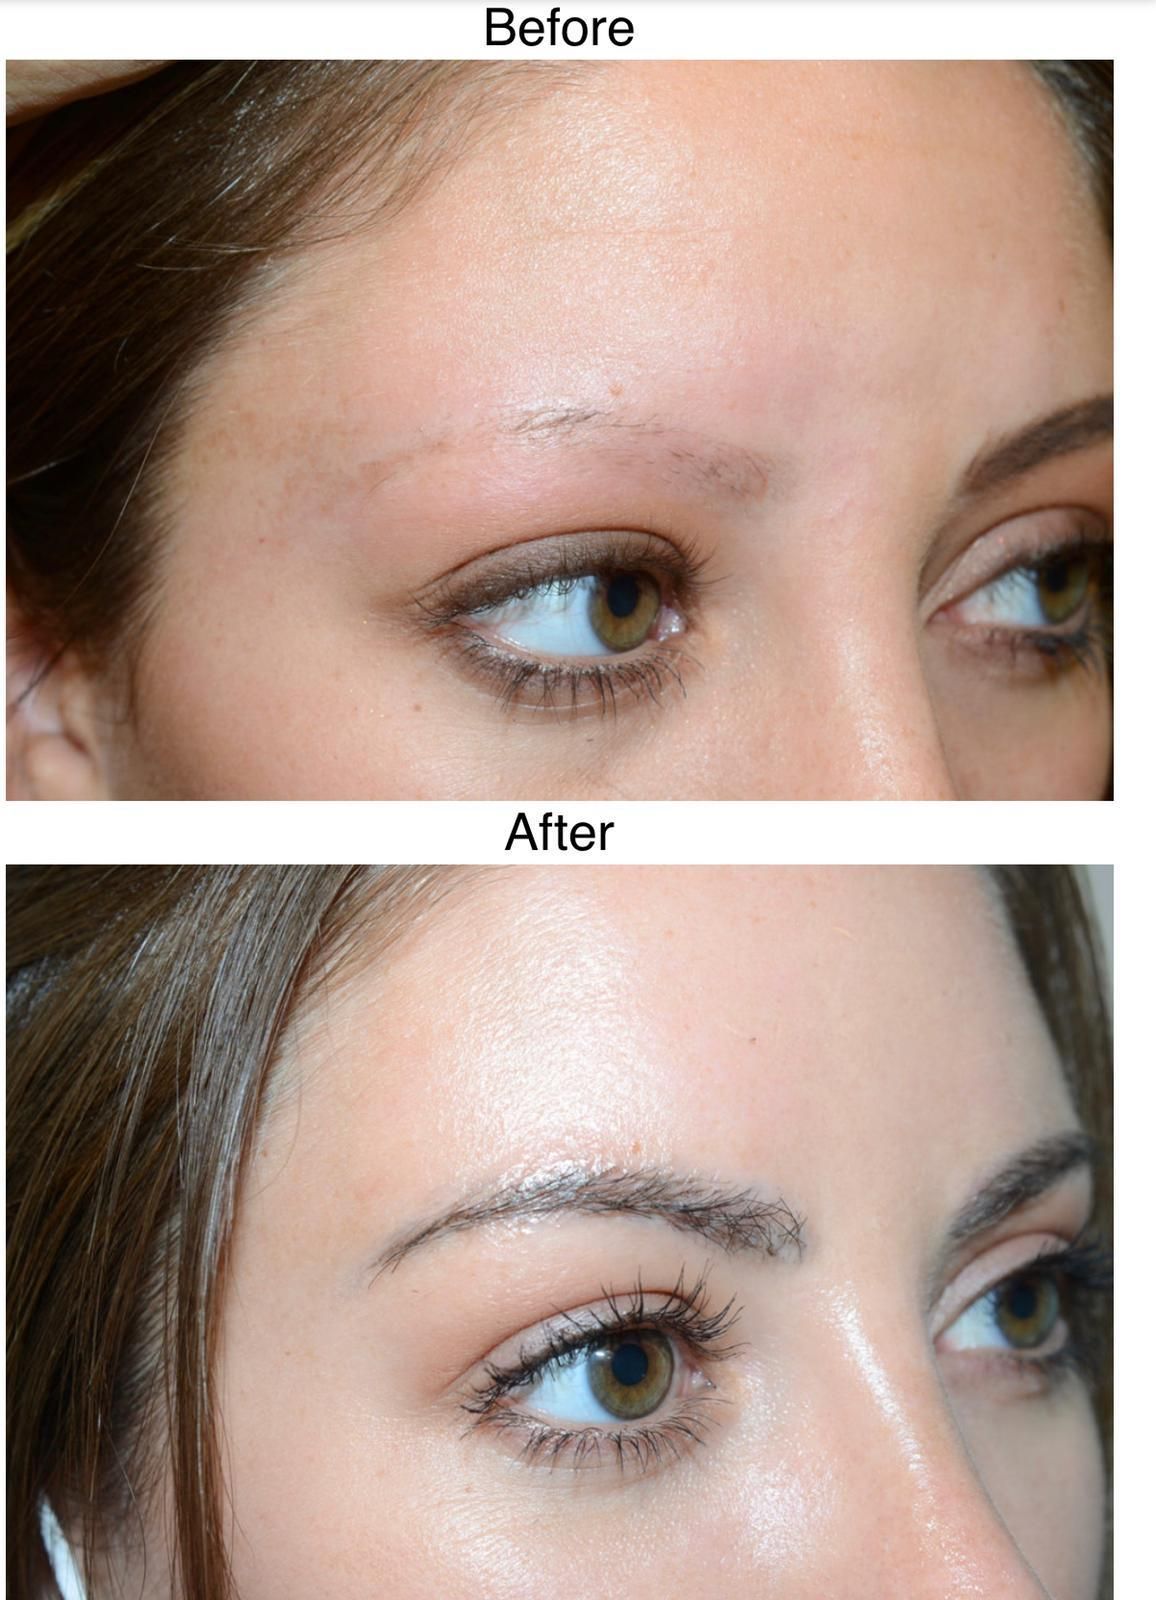 A female before and after undergoing a FUE eyebrow hair transplant